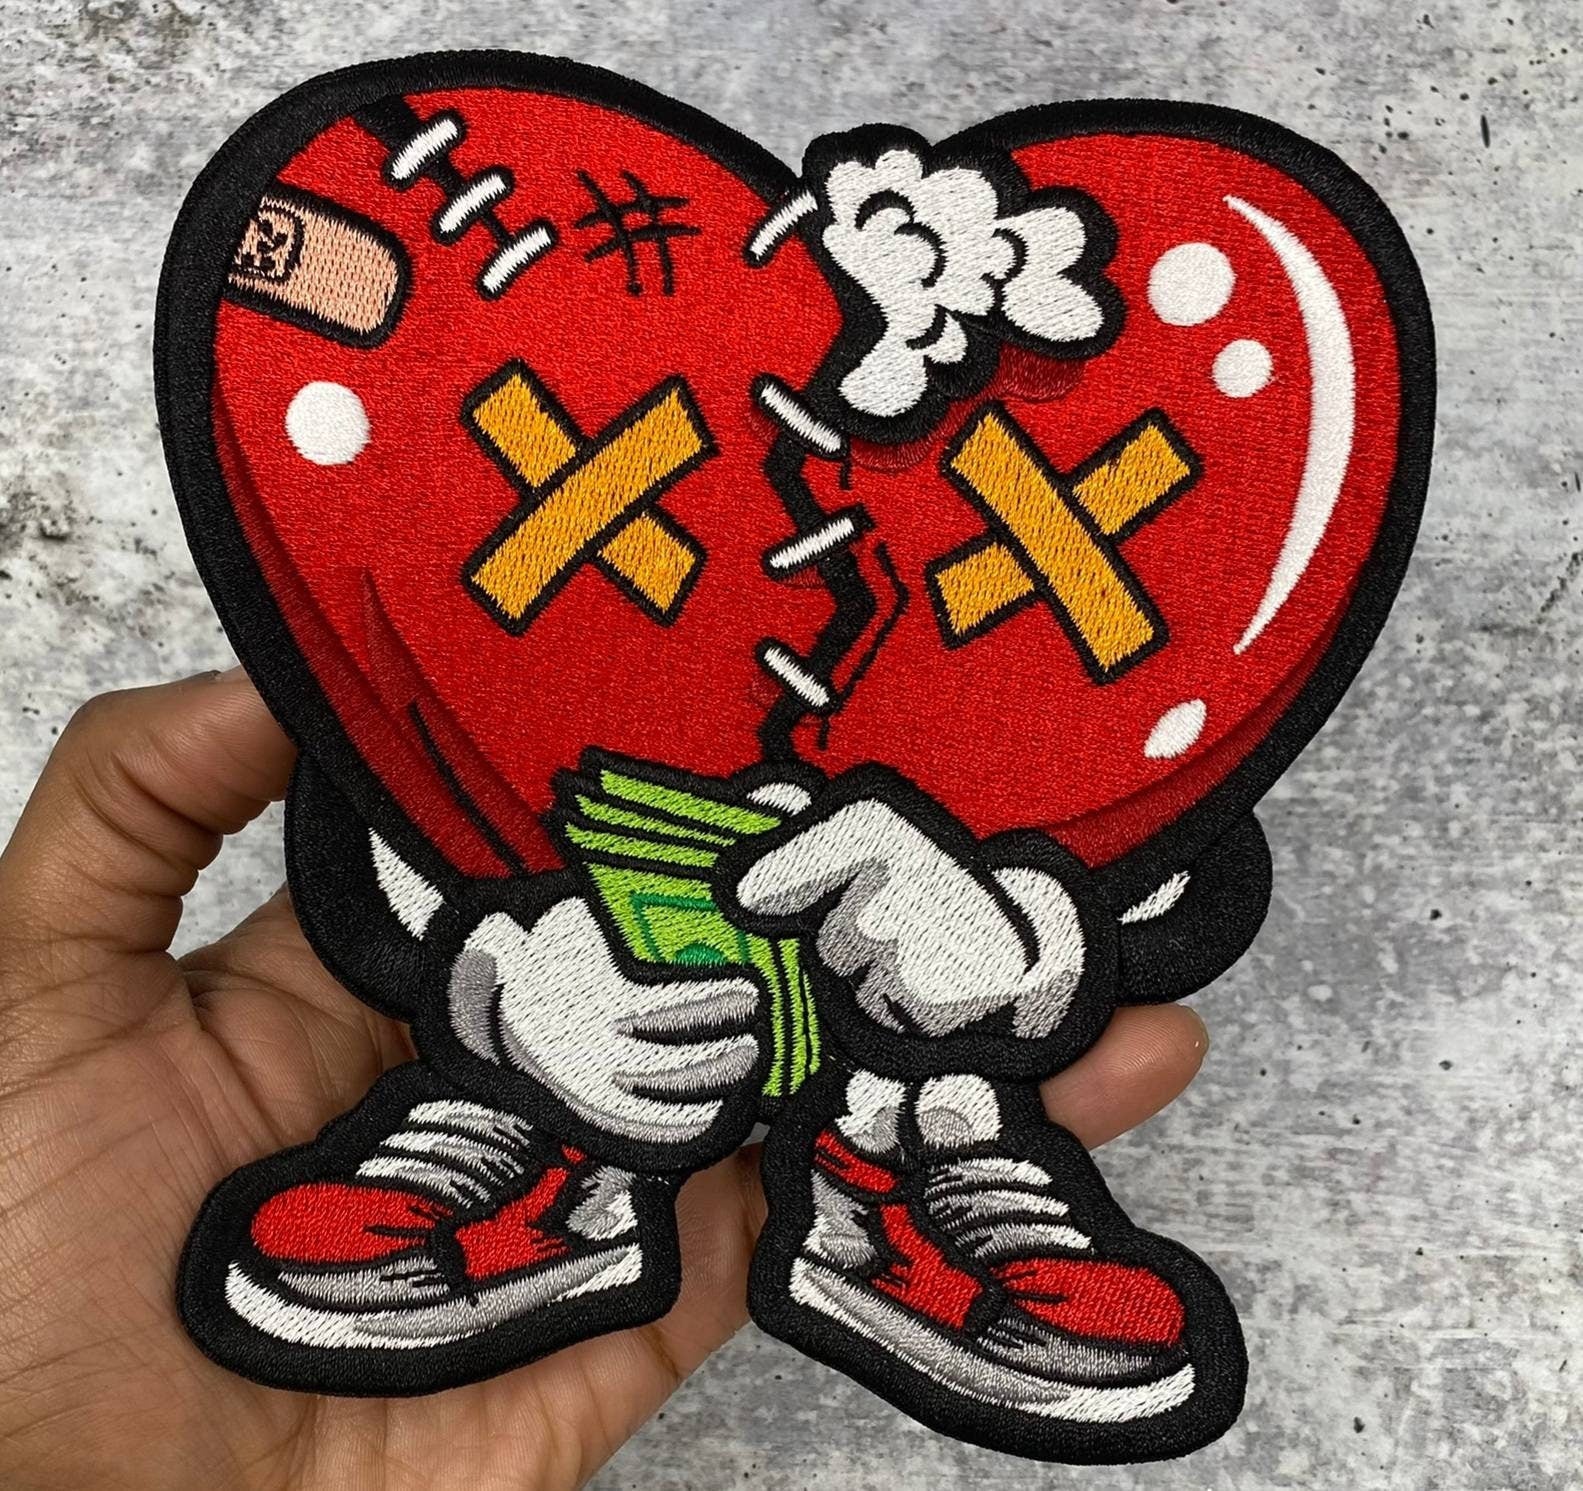 Custom 100% Embroidered Heart Iron On Patch